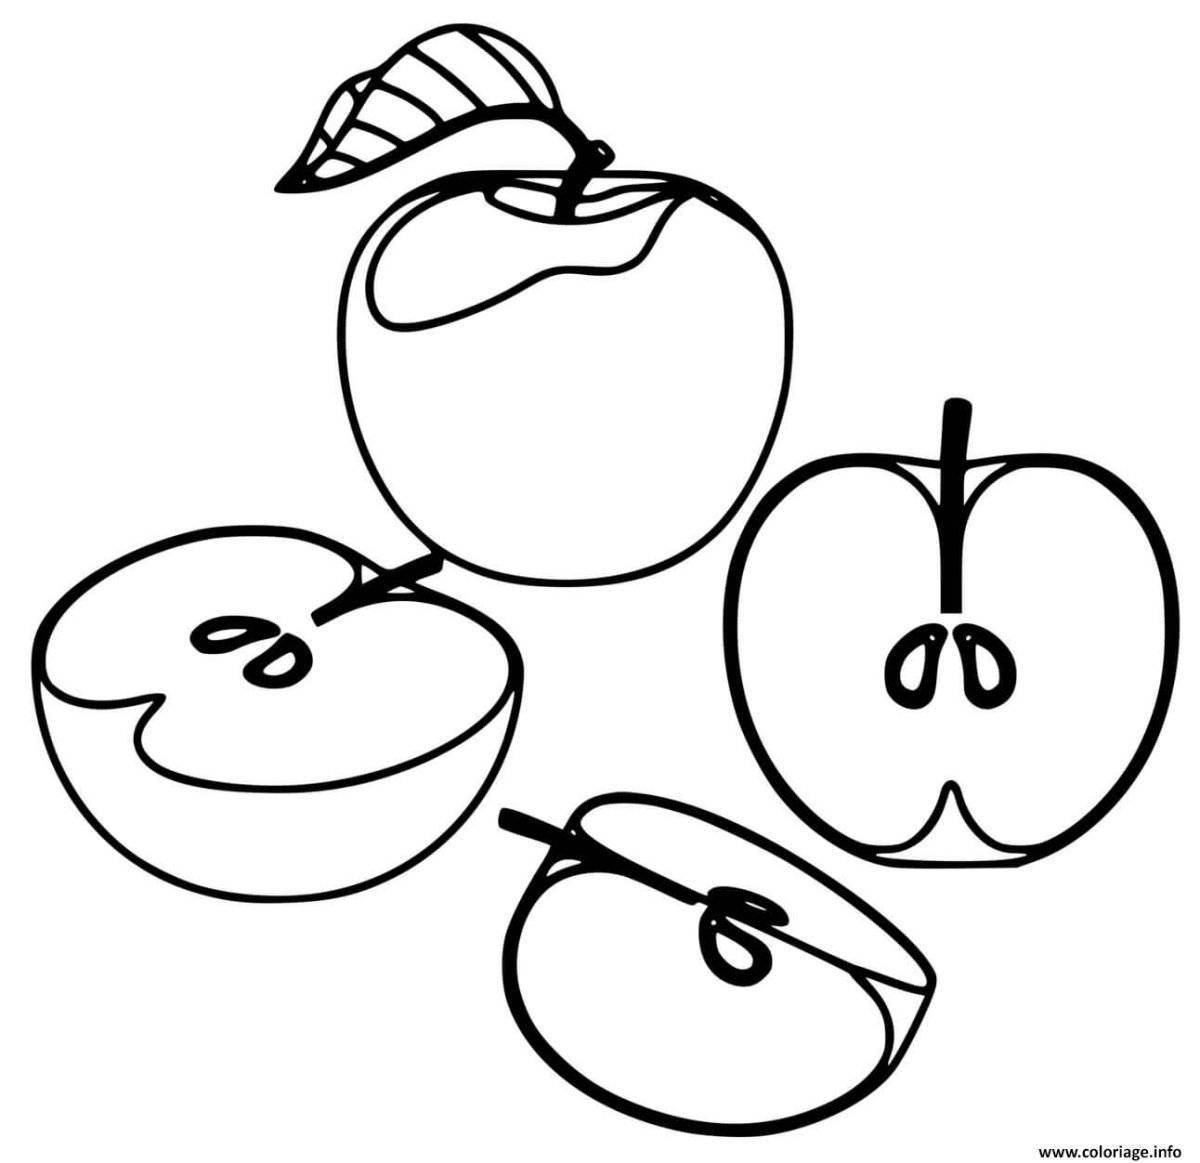 Playful cut apple coloring page